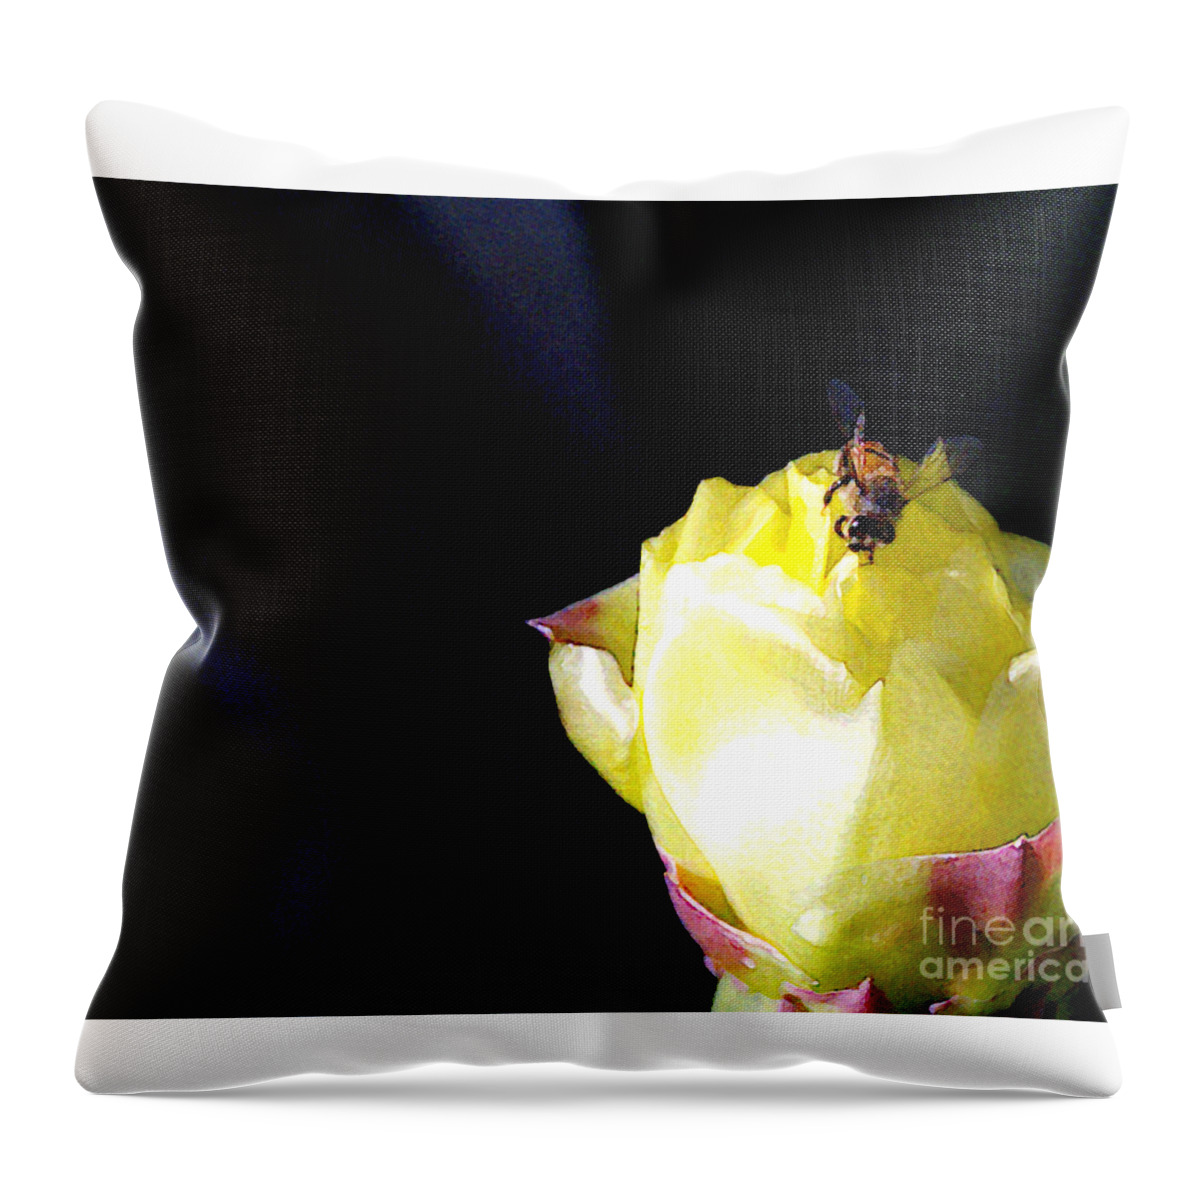 Cactus Throw Pillow featuring the photograph I Feel You Always Near by Linda Shafer